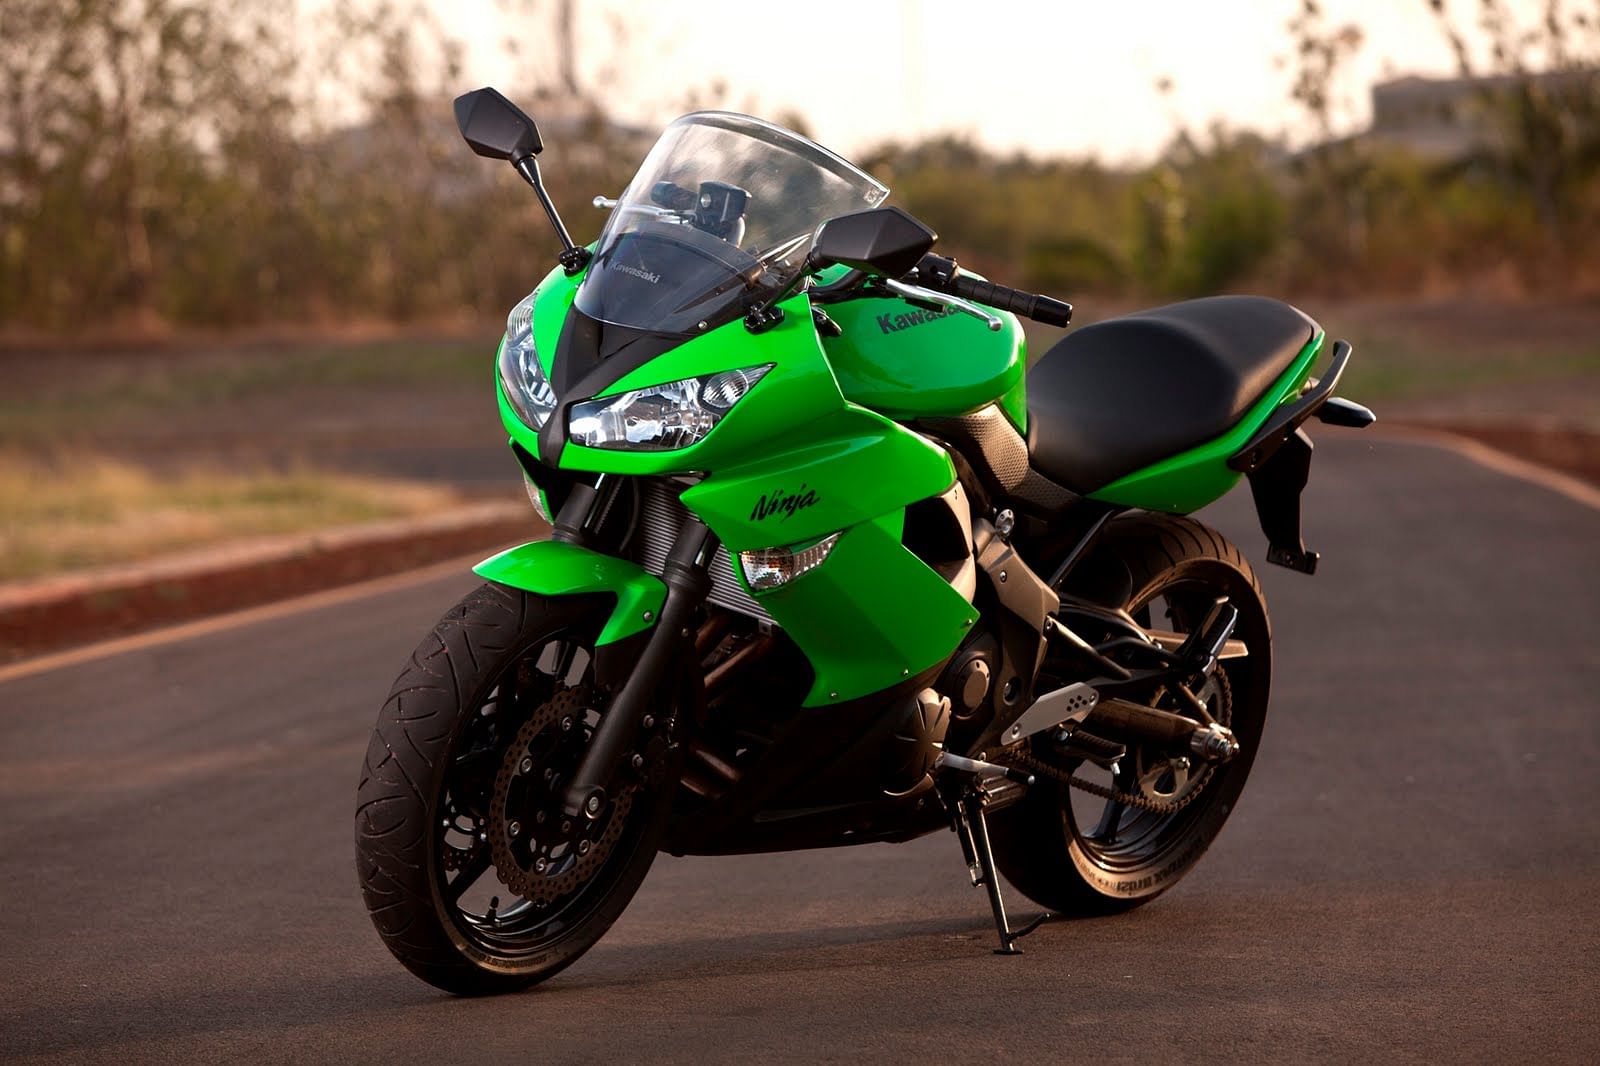 Kawasaki Ninja 650 Bs6 Launched Know Price And Features - भारत में ...